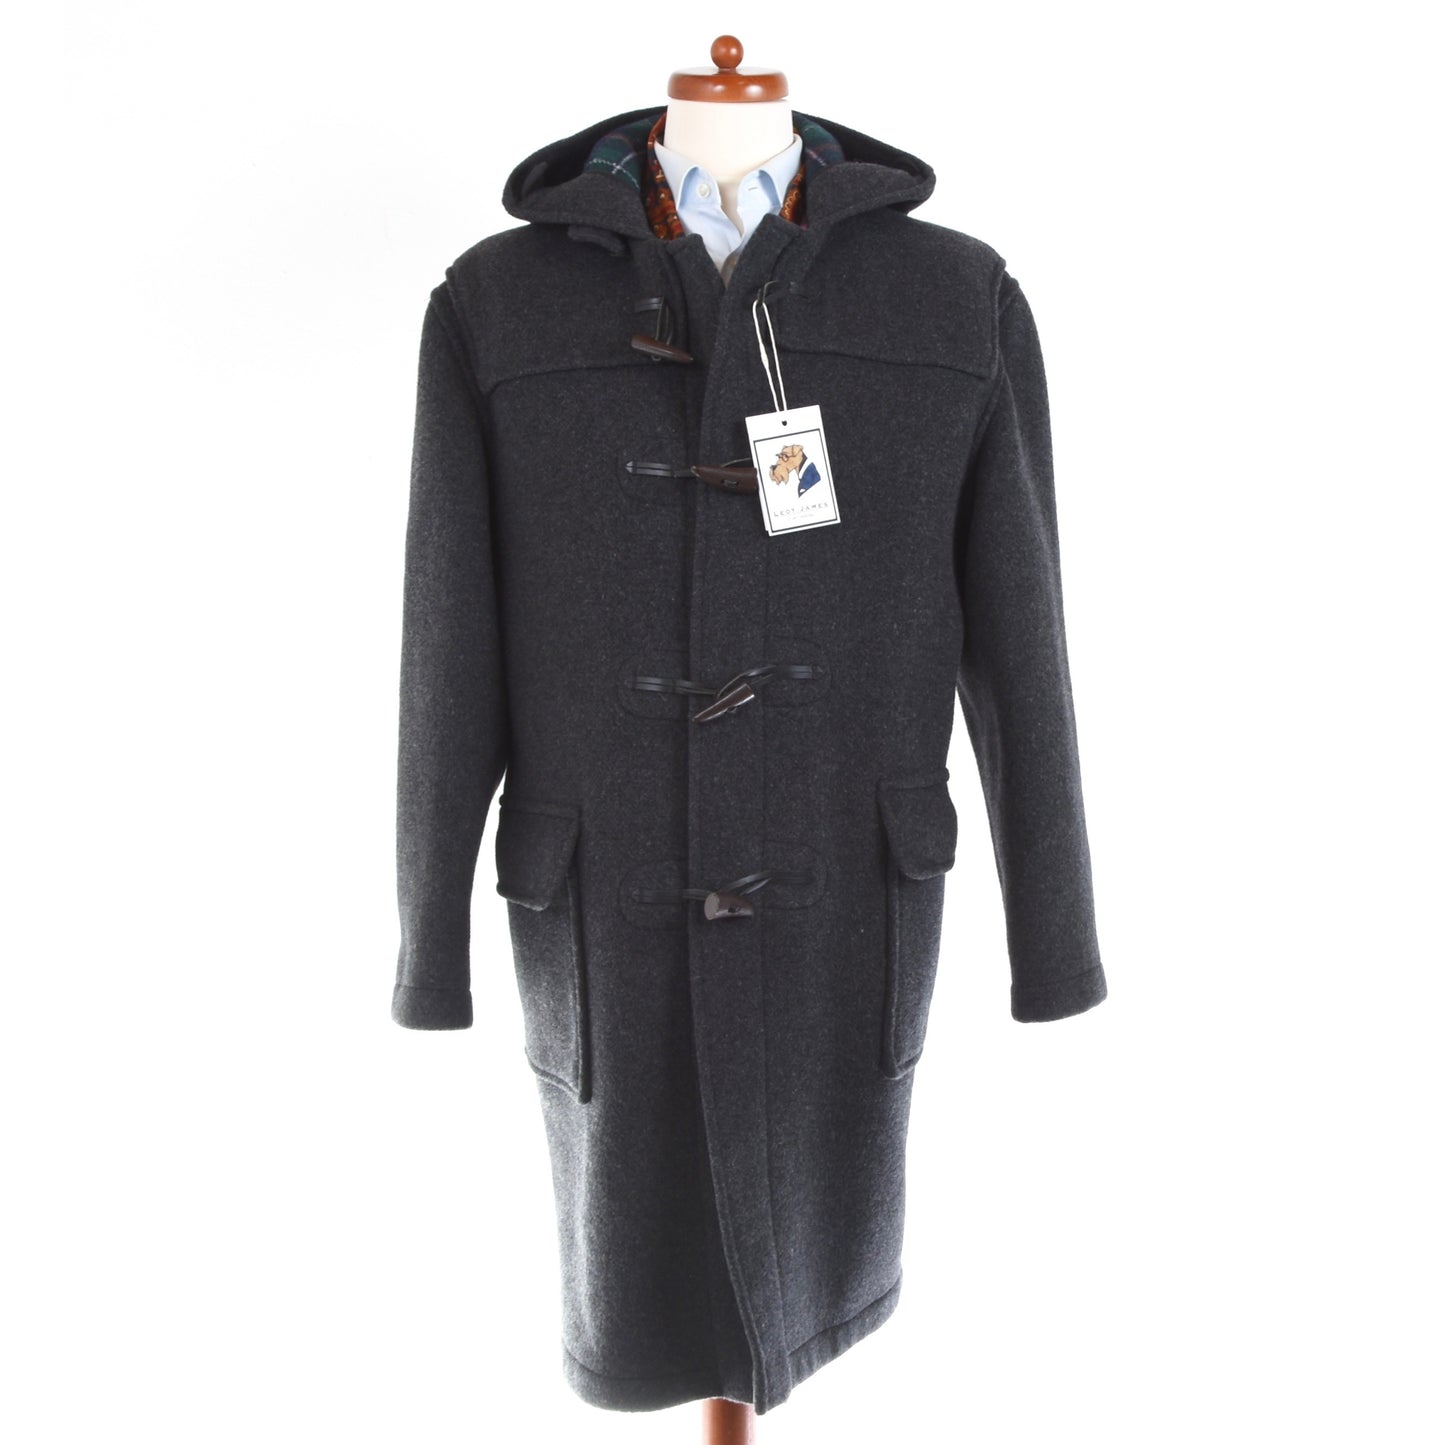 Gloverall Duffle Coat Size EUR 52 GB 42 - Grey